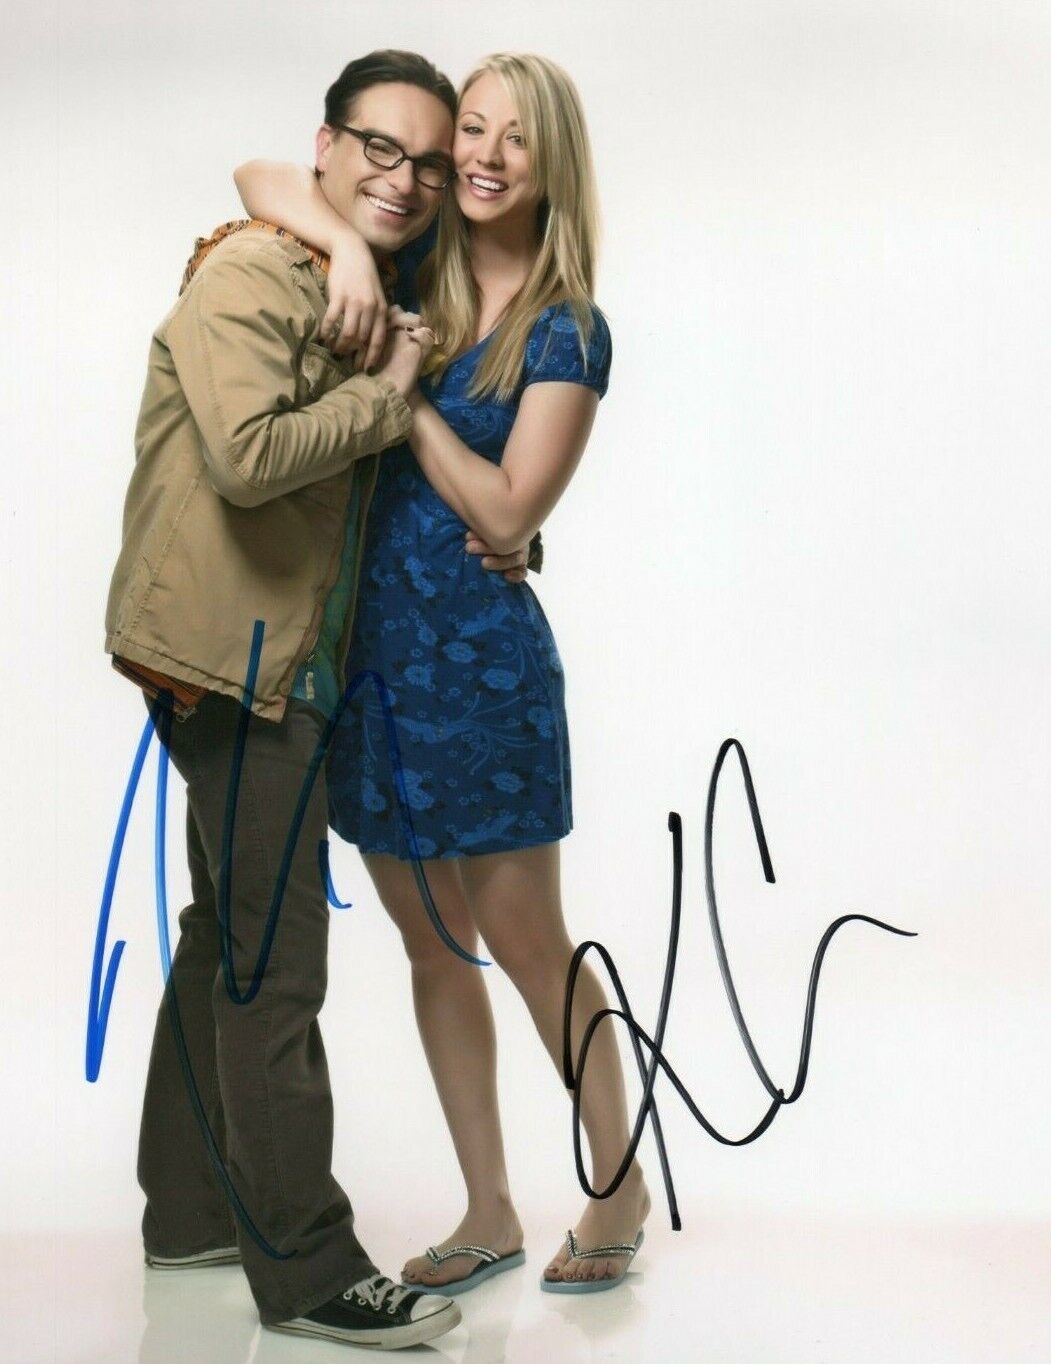 Autographed Johnny Galecki & Kaley Cuoco signed 8x10 photo The Big Bang Theory